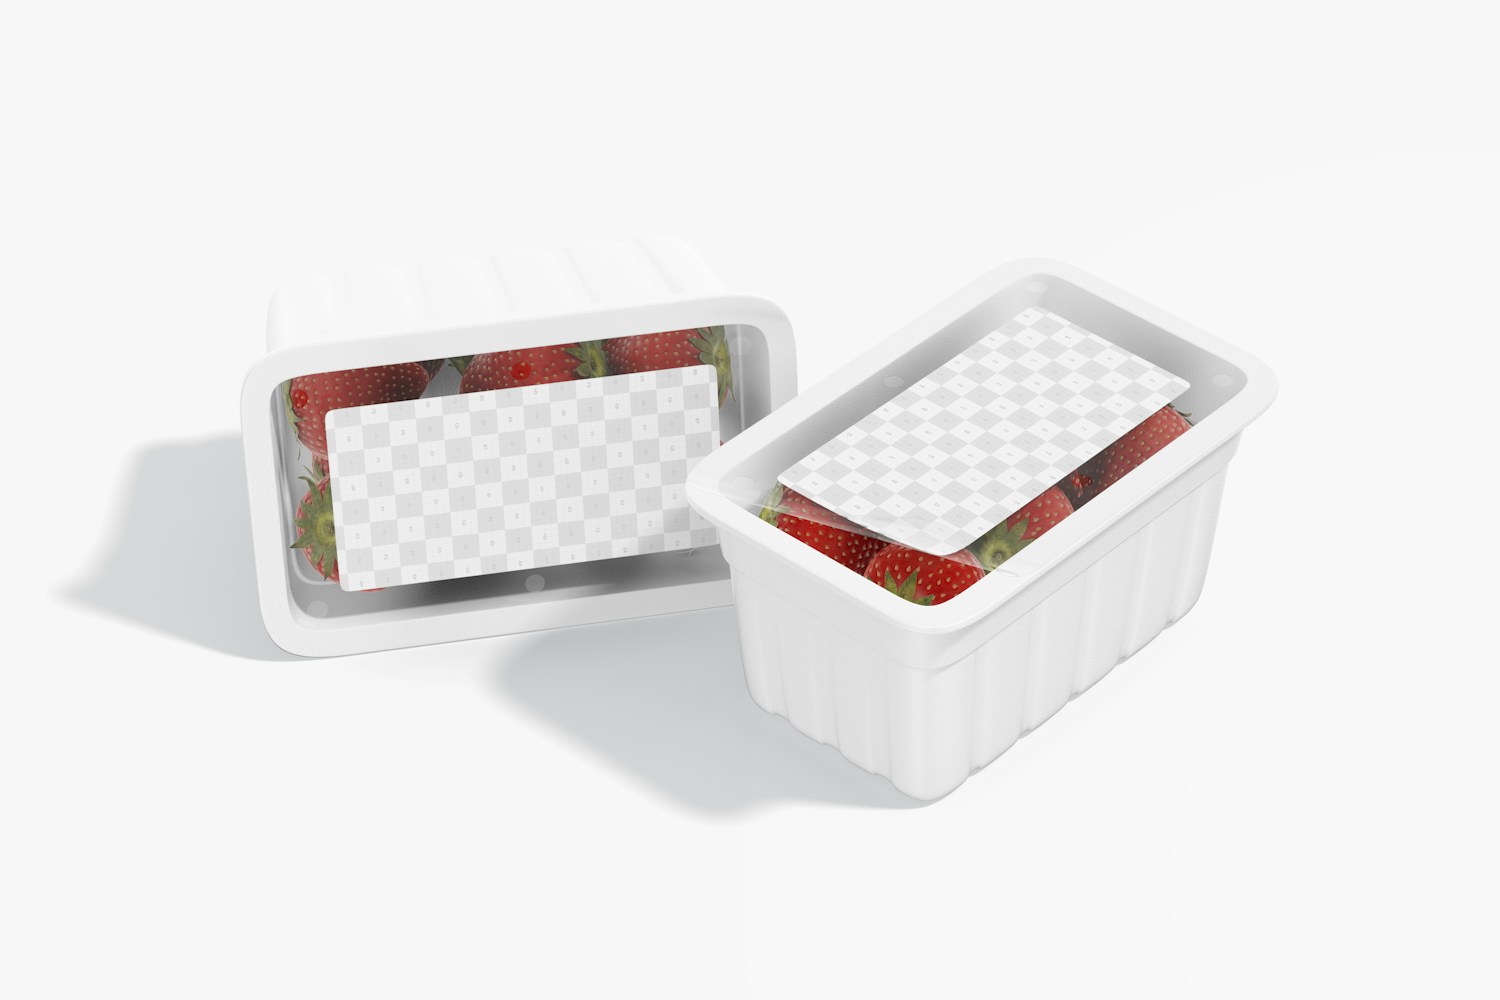 Rectangular Fruit Packaging Mockup, Standing and Dropped